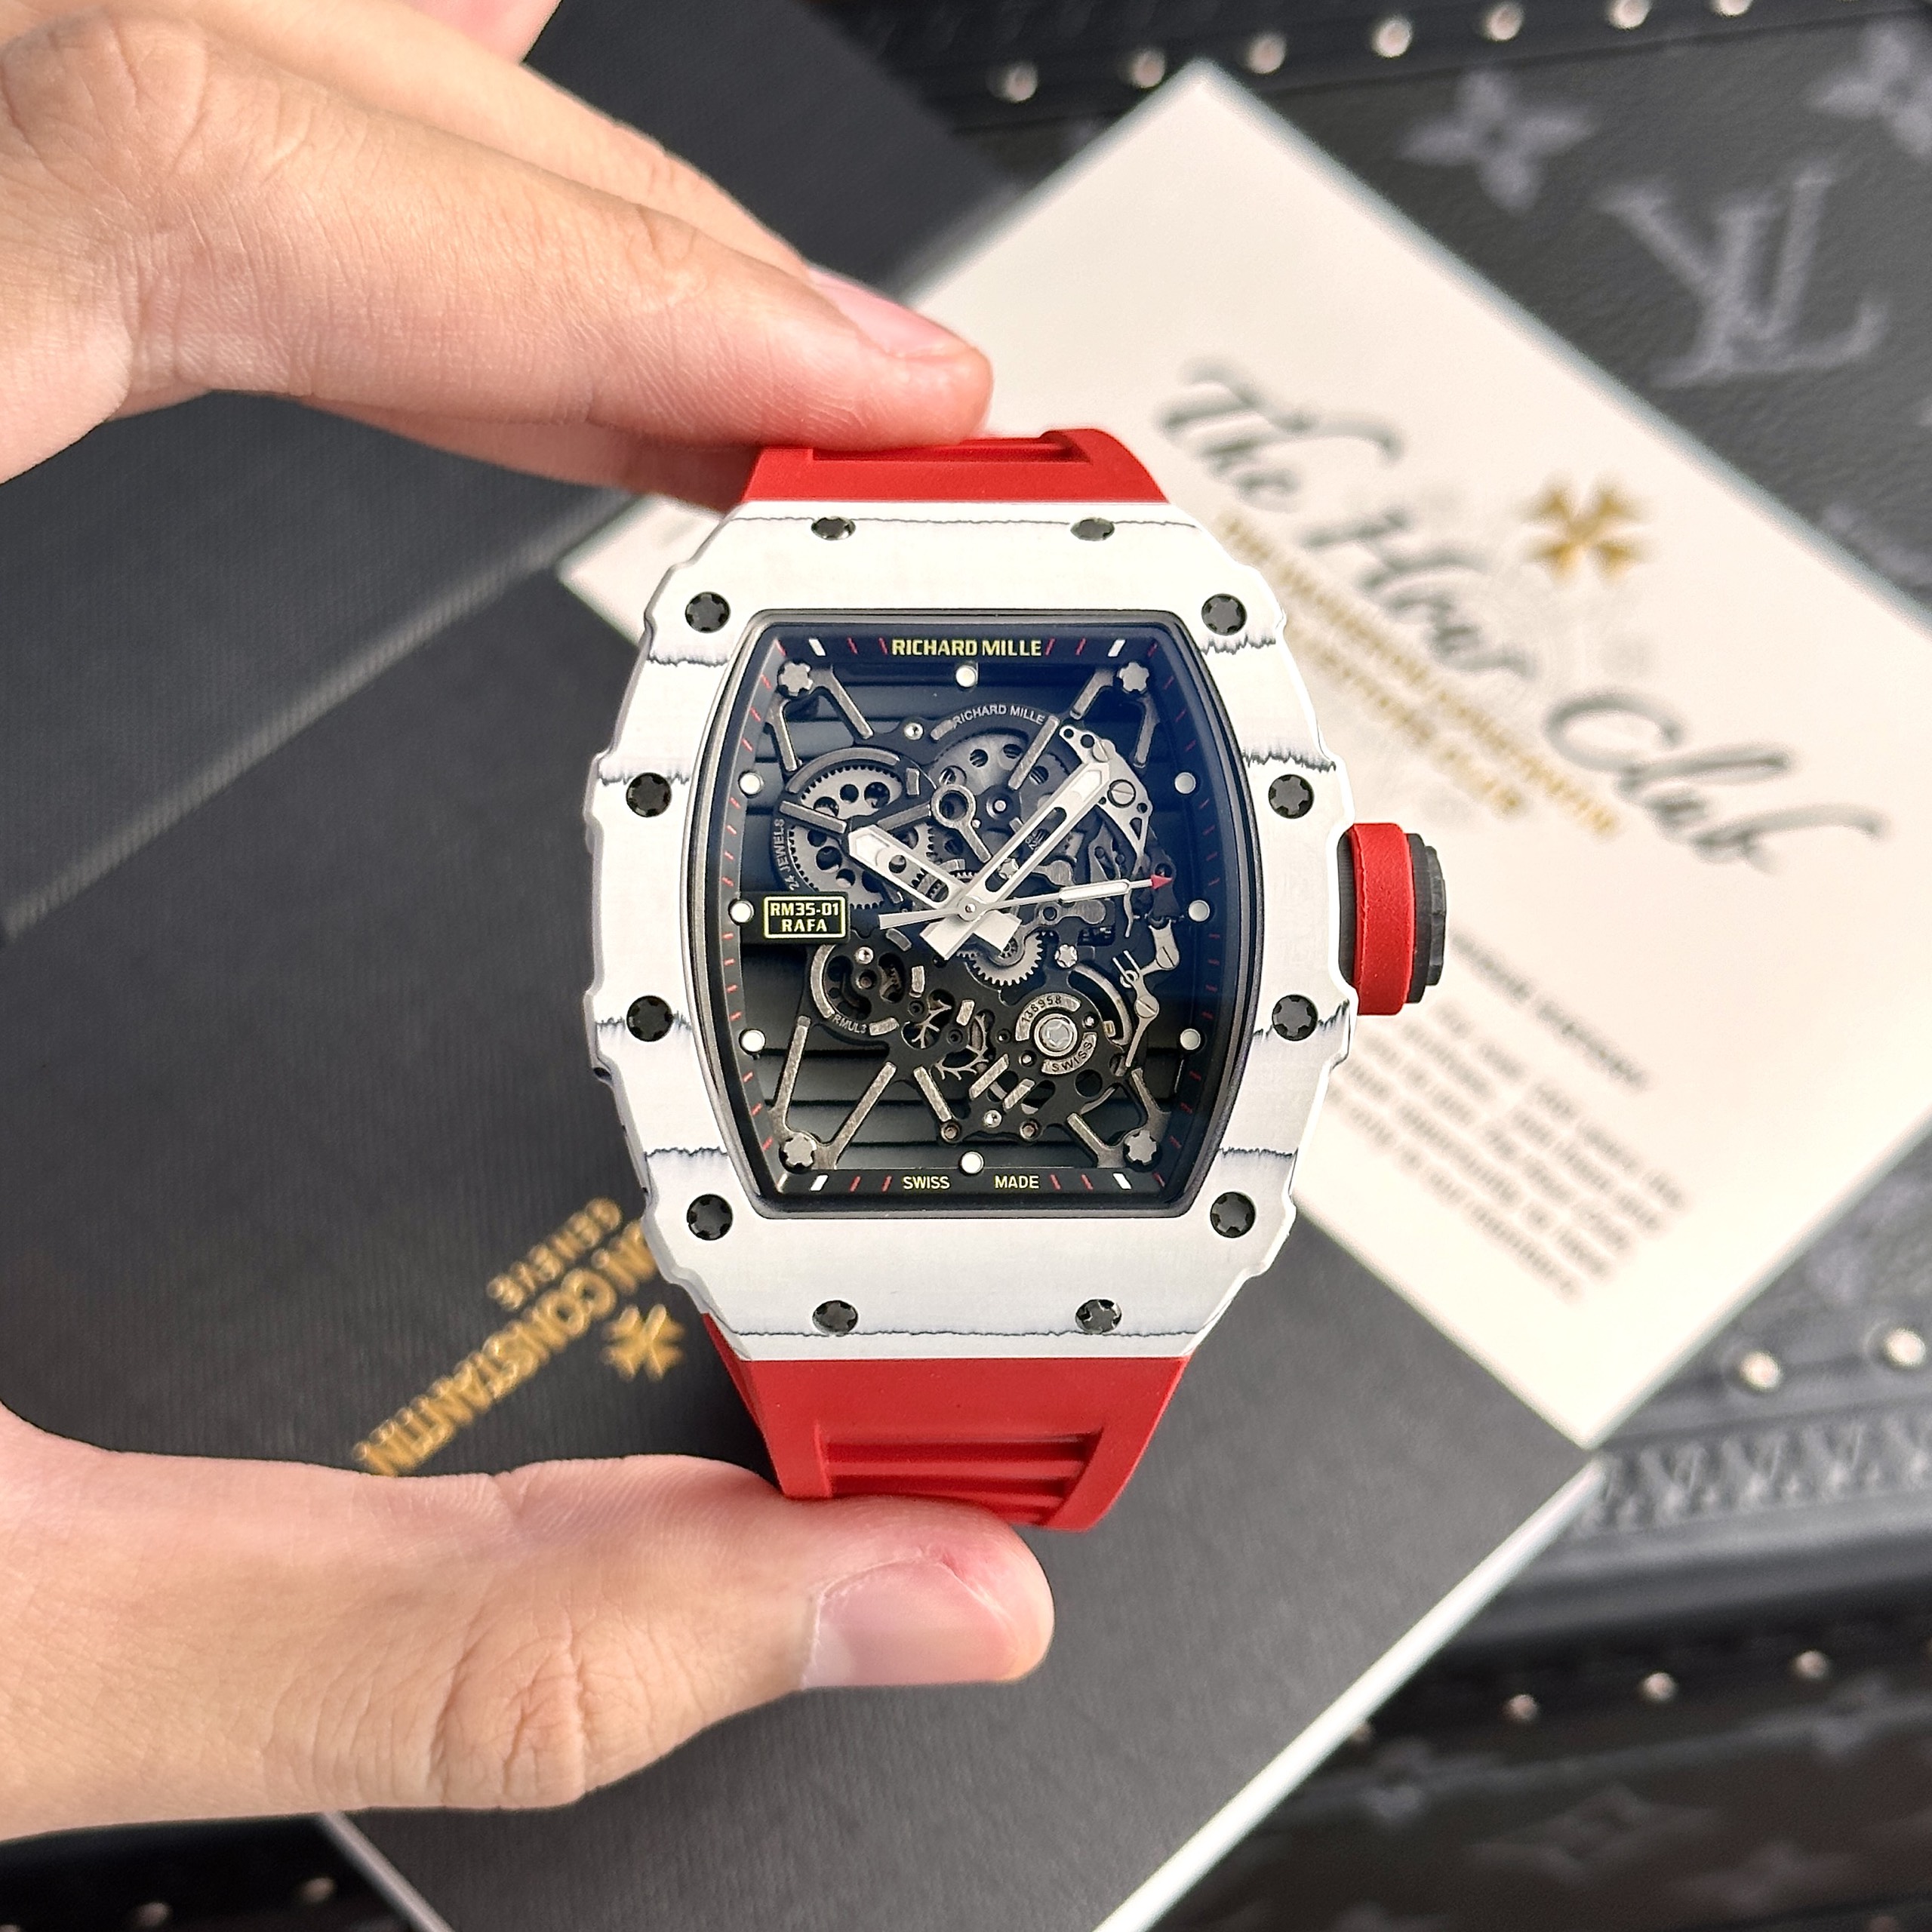 Richard Mille RM35-01 Rafael Nadal White Carbon Replica Watches BBR 44mm (7)